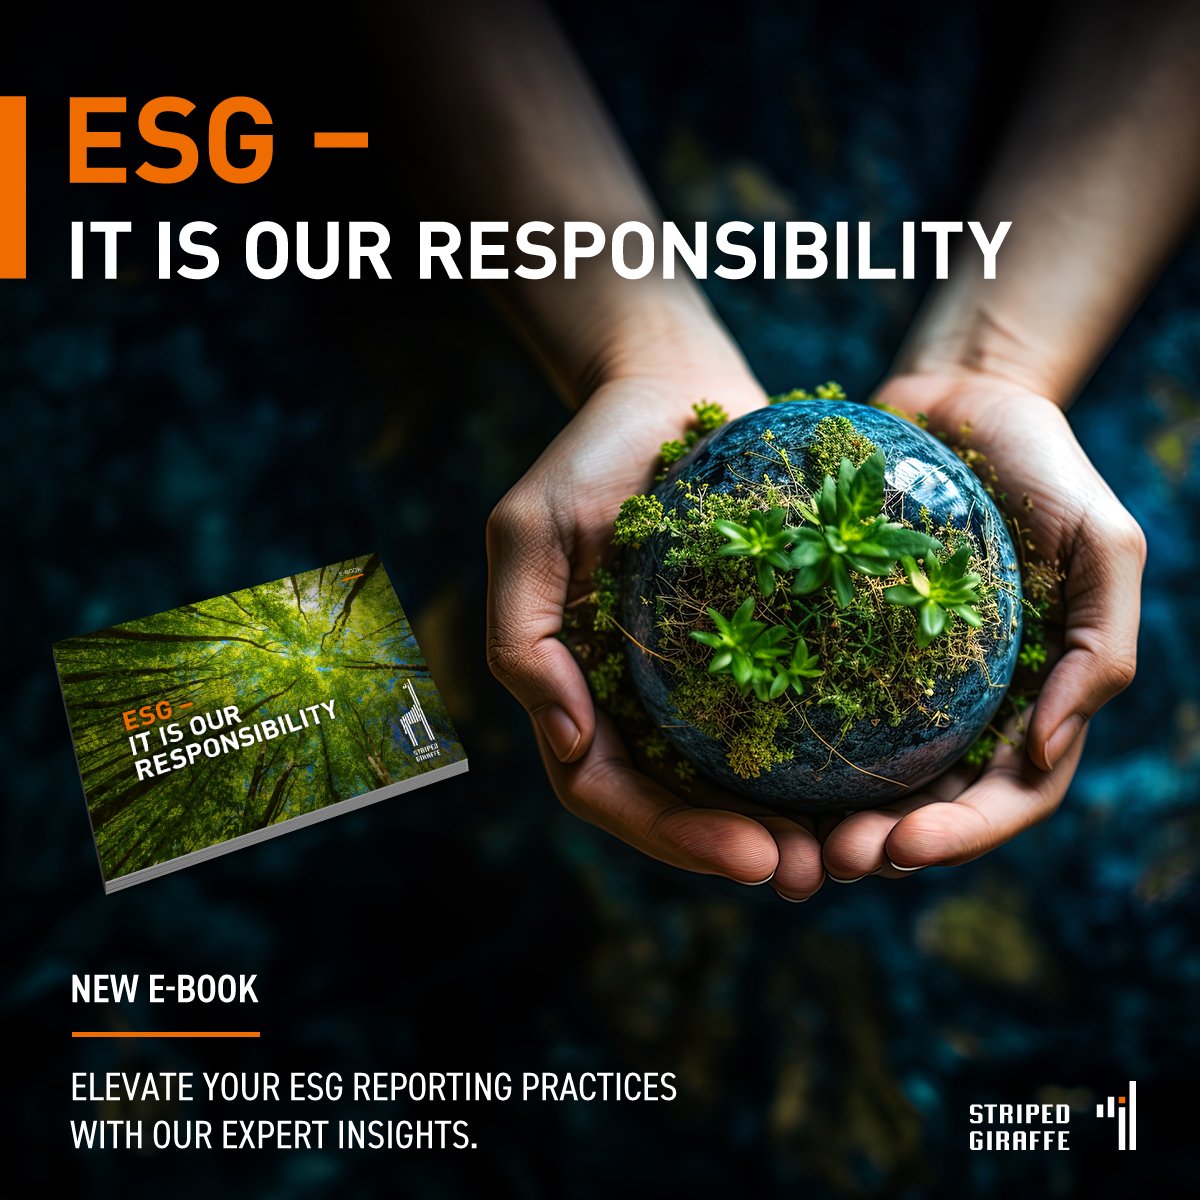 🌿 Discover a wealth of #insights on #ESG (environmental, social & corporate governance) in our new #ebook “ESG – It is our responsibility”.

👉📗 Get your free download today: bit.ly/ESG_ebook

#ESGreporting #Sustainability #CorporateResponsibility #CSRD #SFDR #Ecommerce